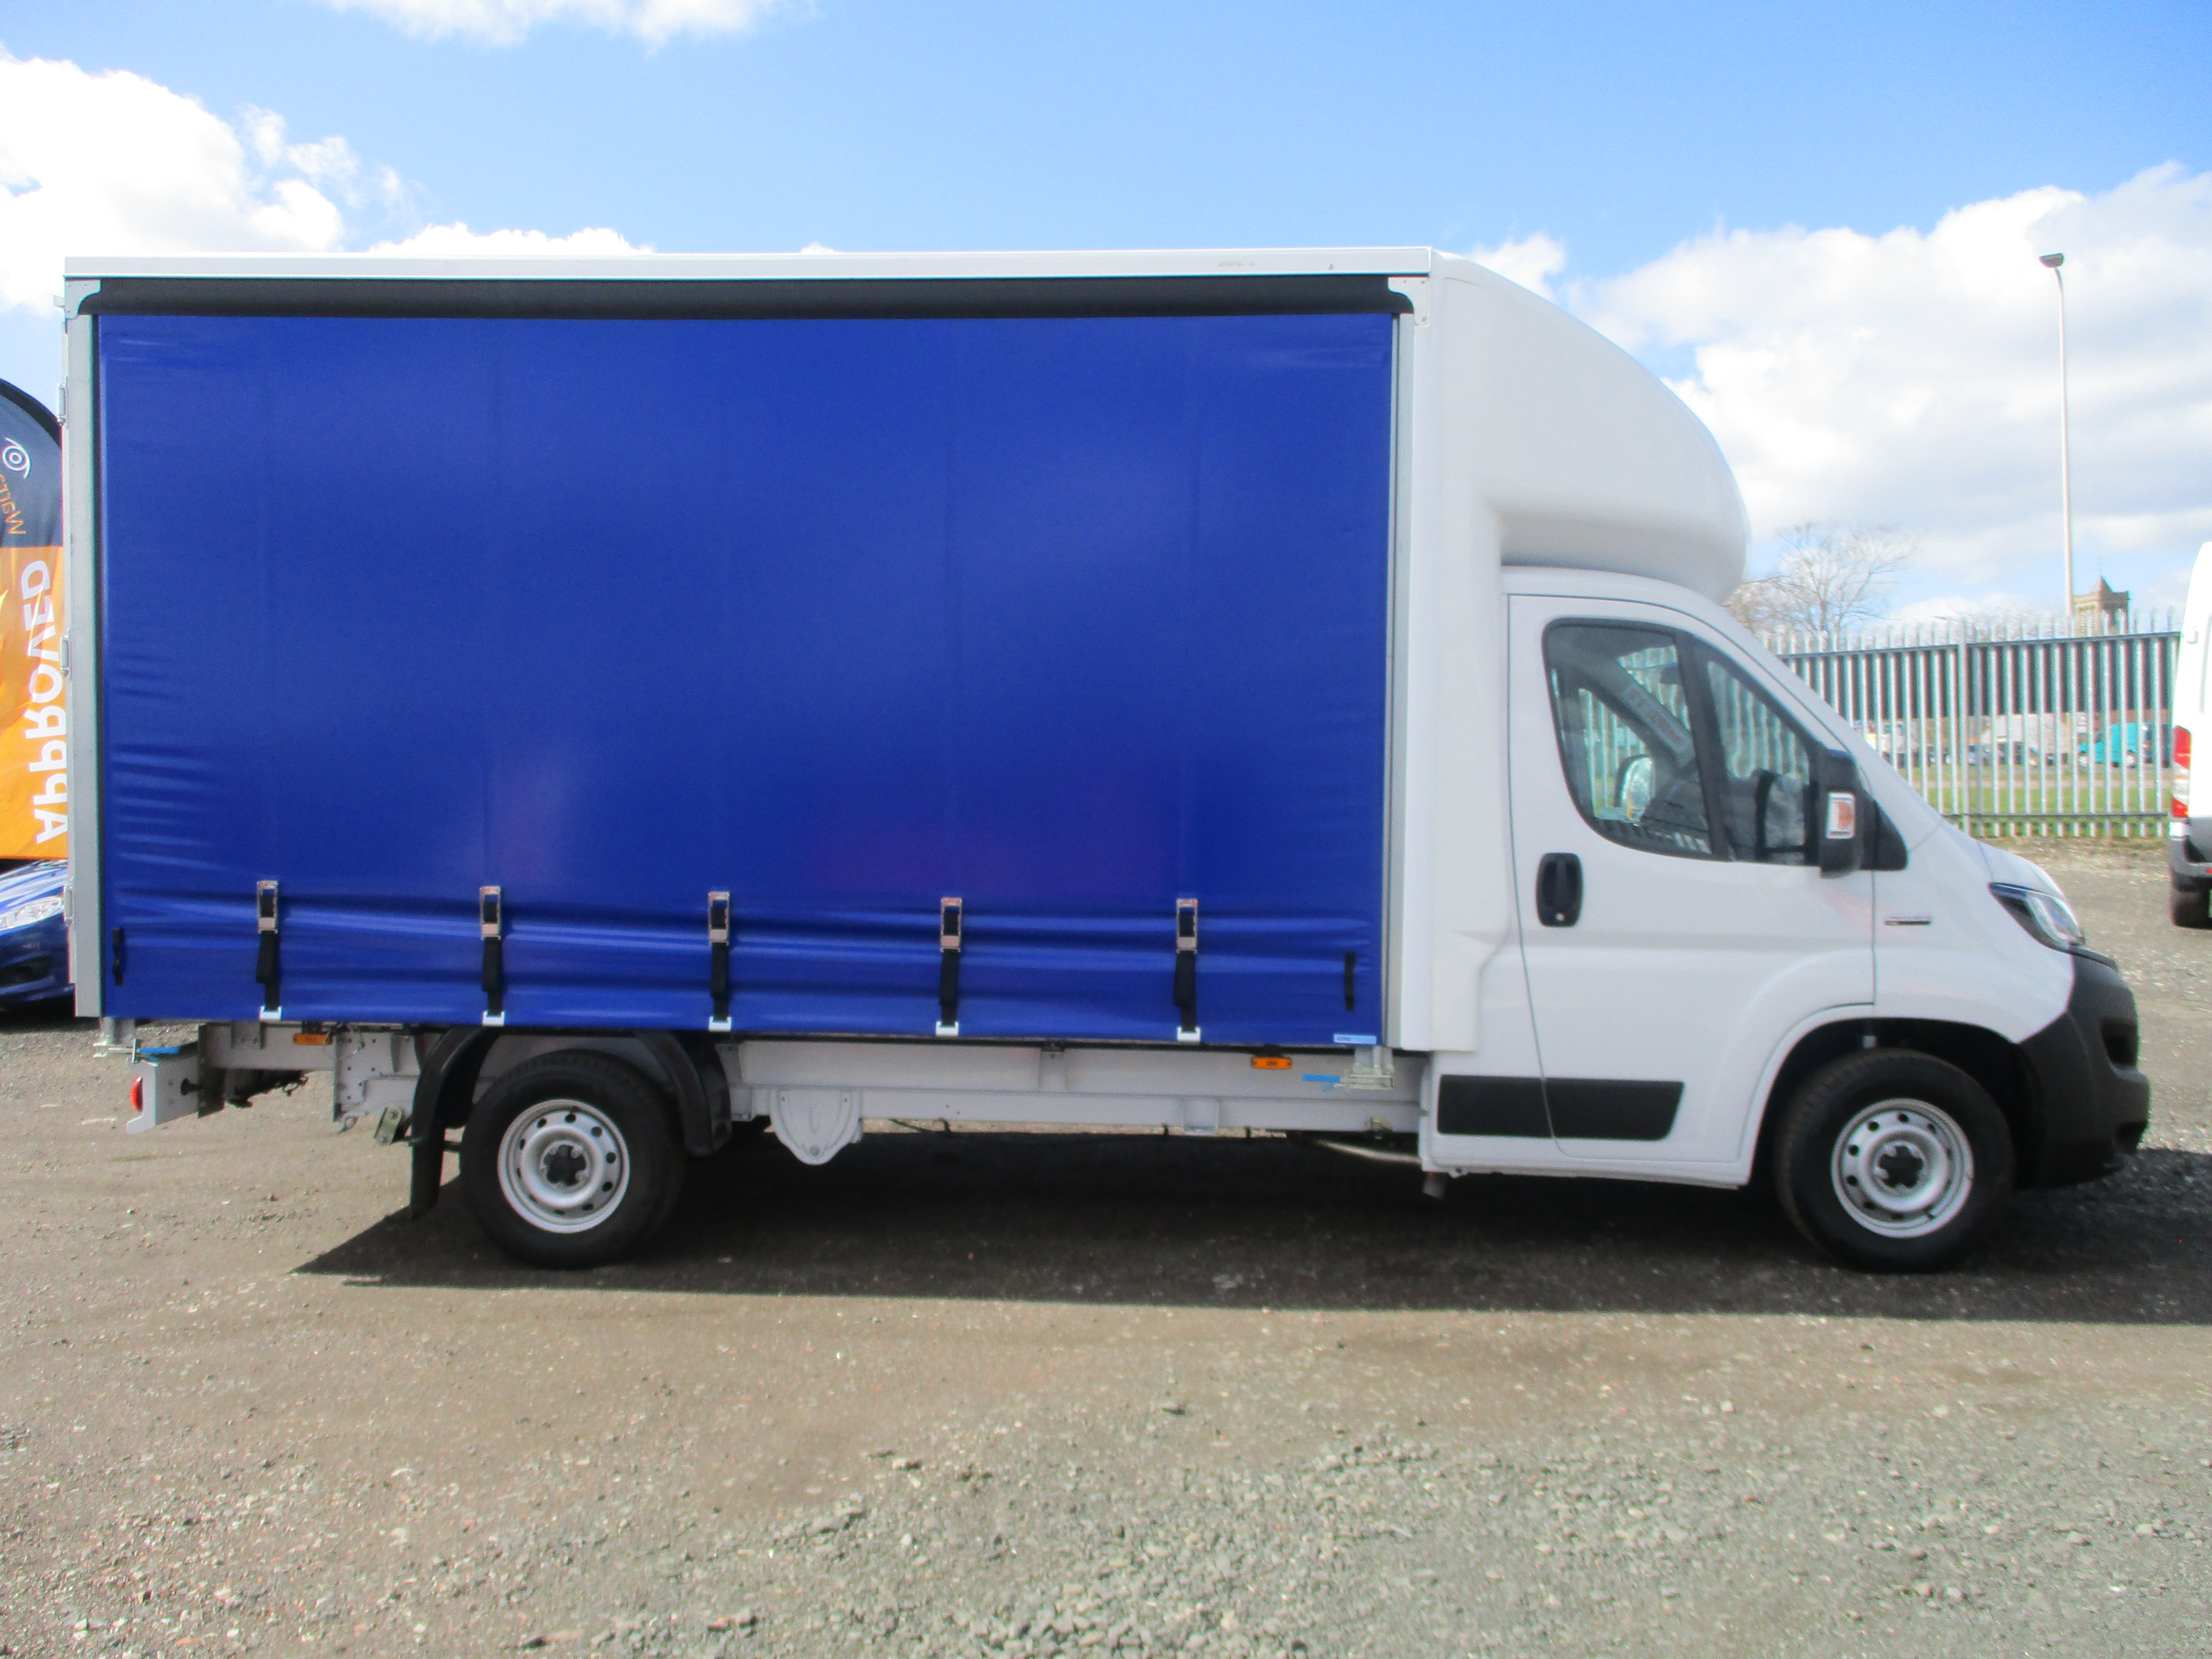 Fiat Ducato Curtainsider Series 8 with Barn Doors 2.3 Diesel 140PS, BIG SPEC with AIR CON (£1,900 OFF RRP)